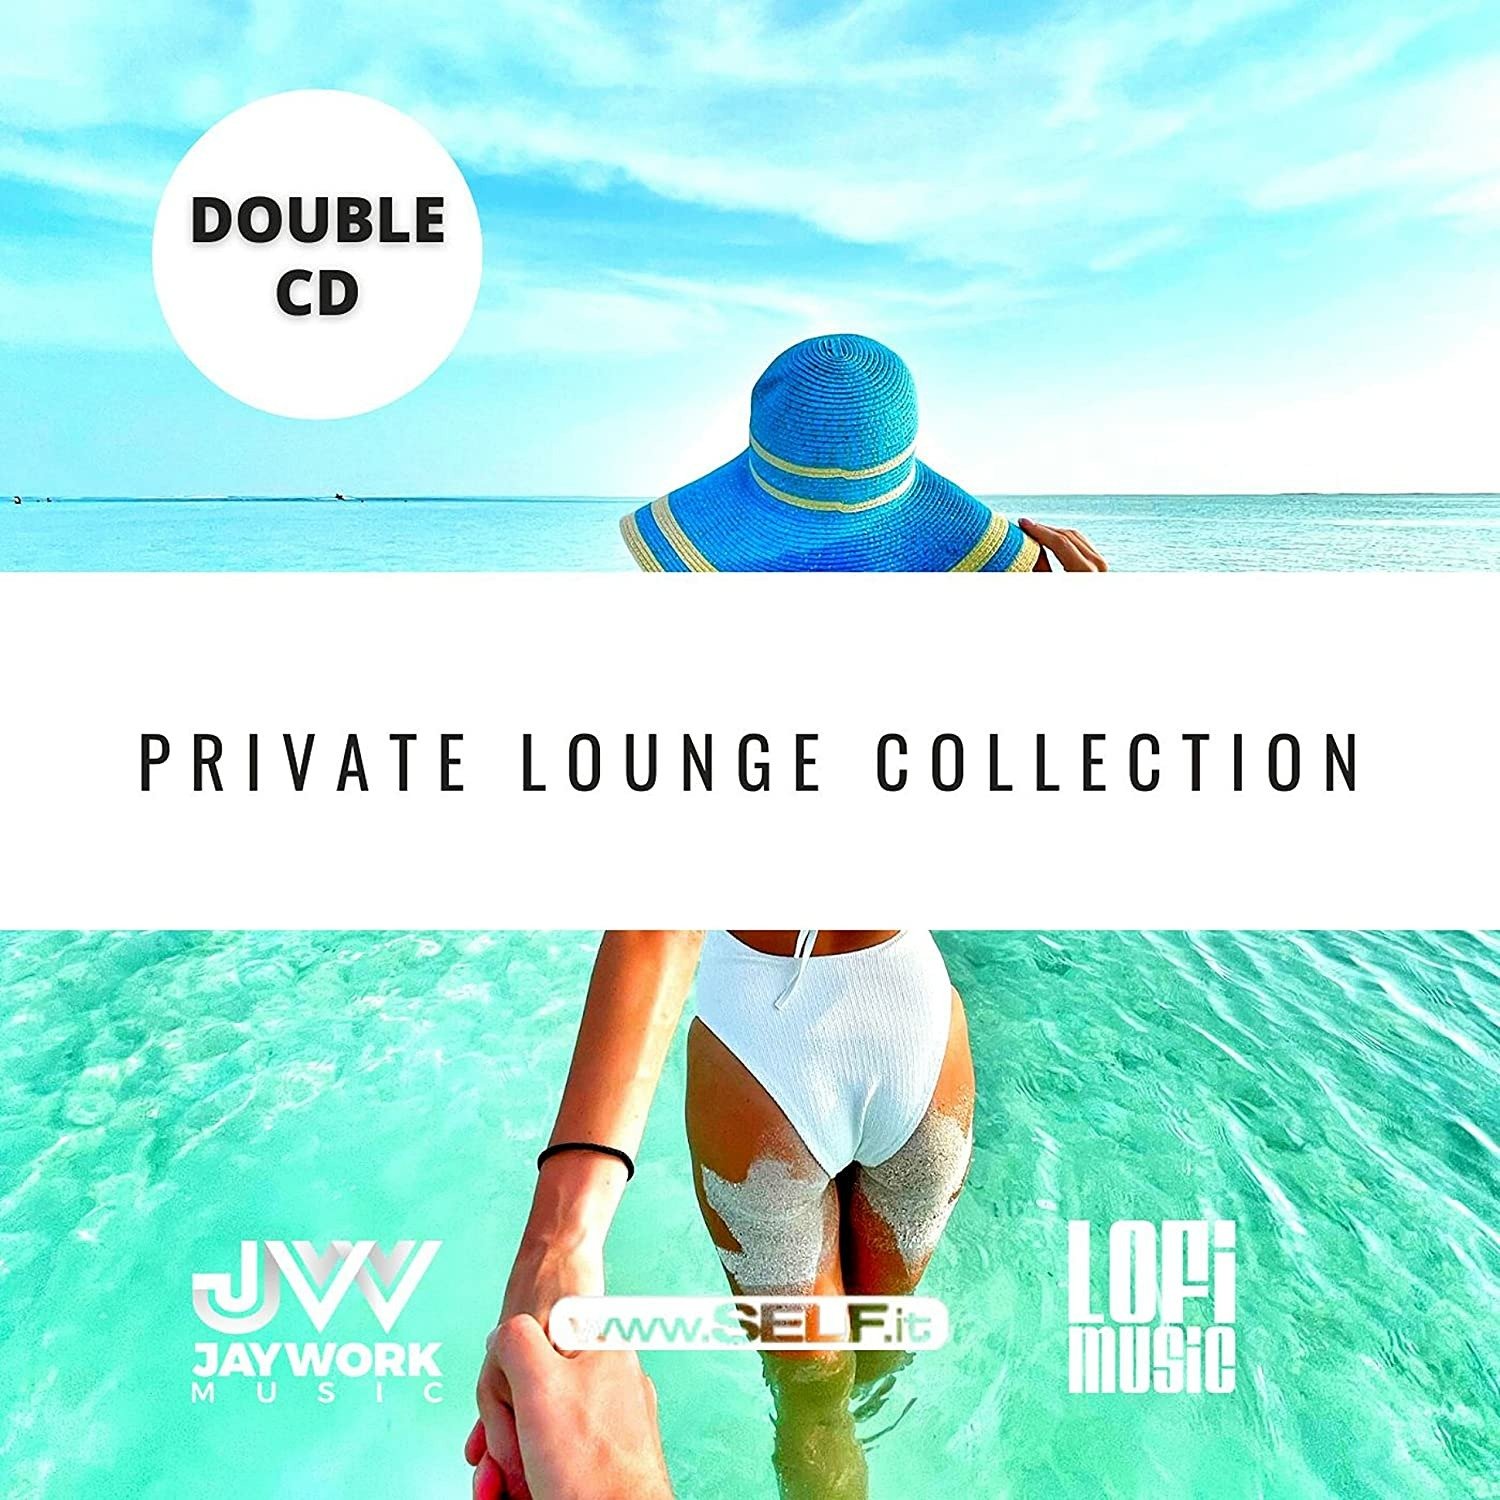 CD Shop - V/A PRIVATE LOUNGE COLLECTION